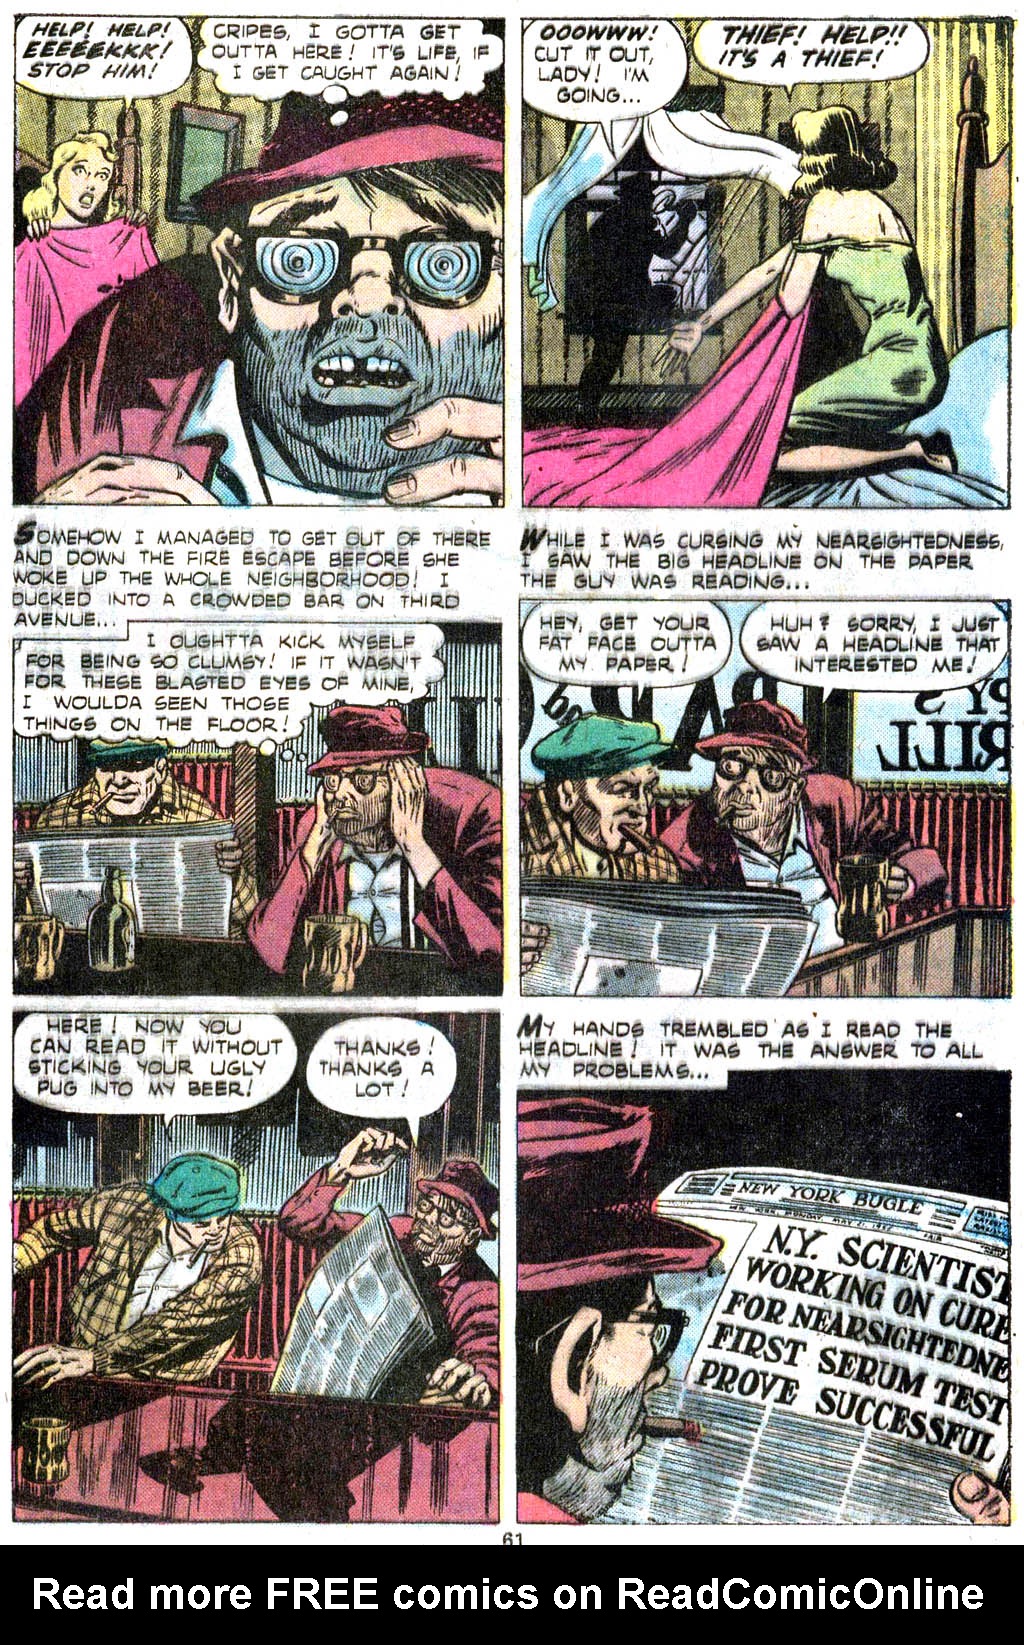 Marvel Tales (1949) 109 Page 2